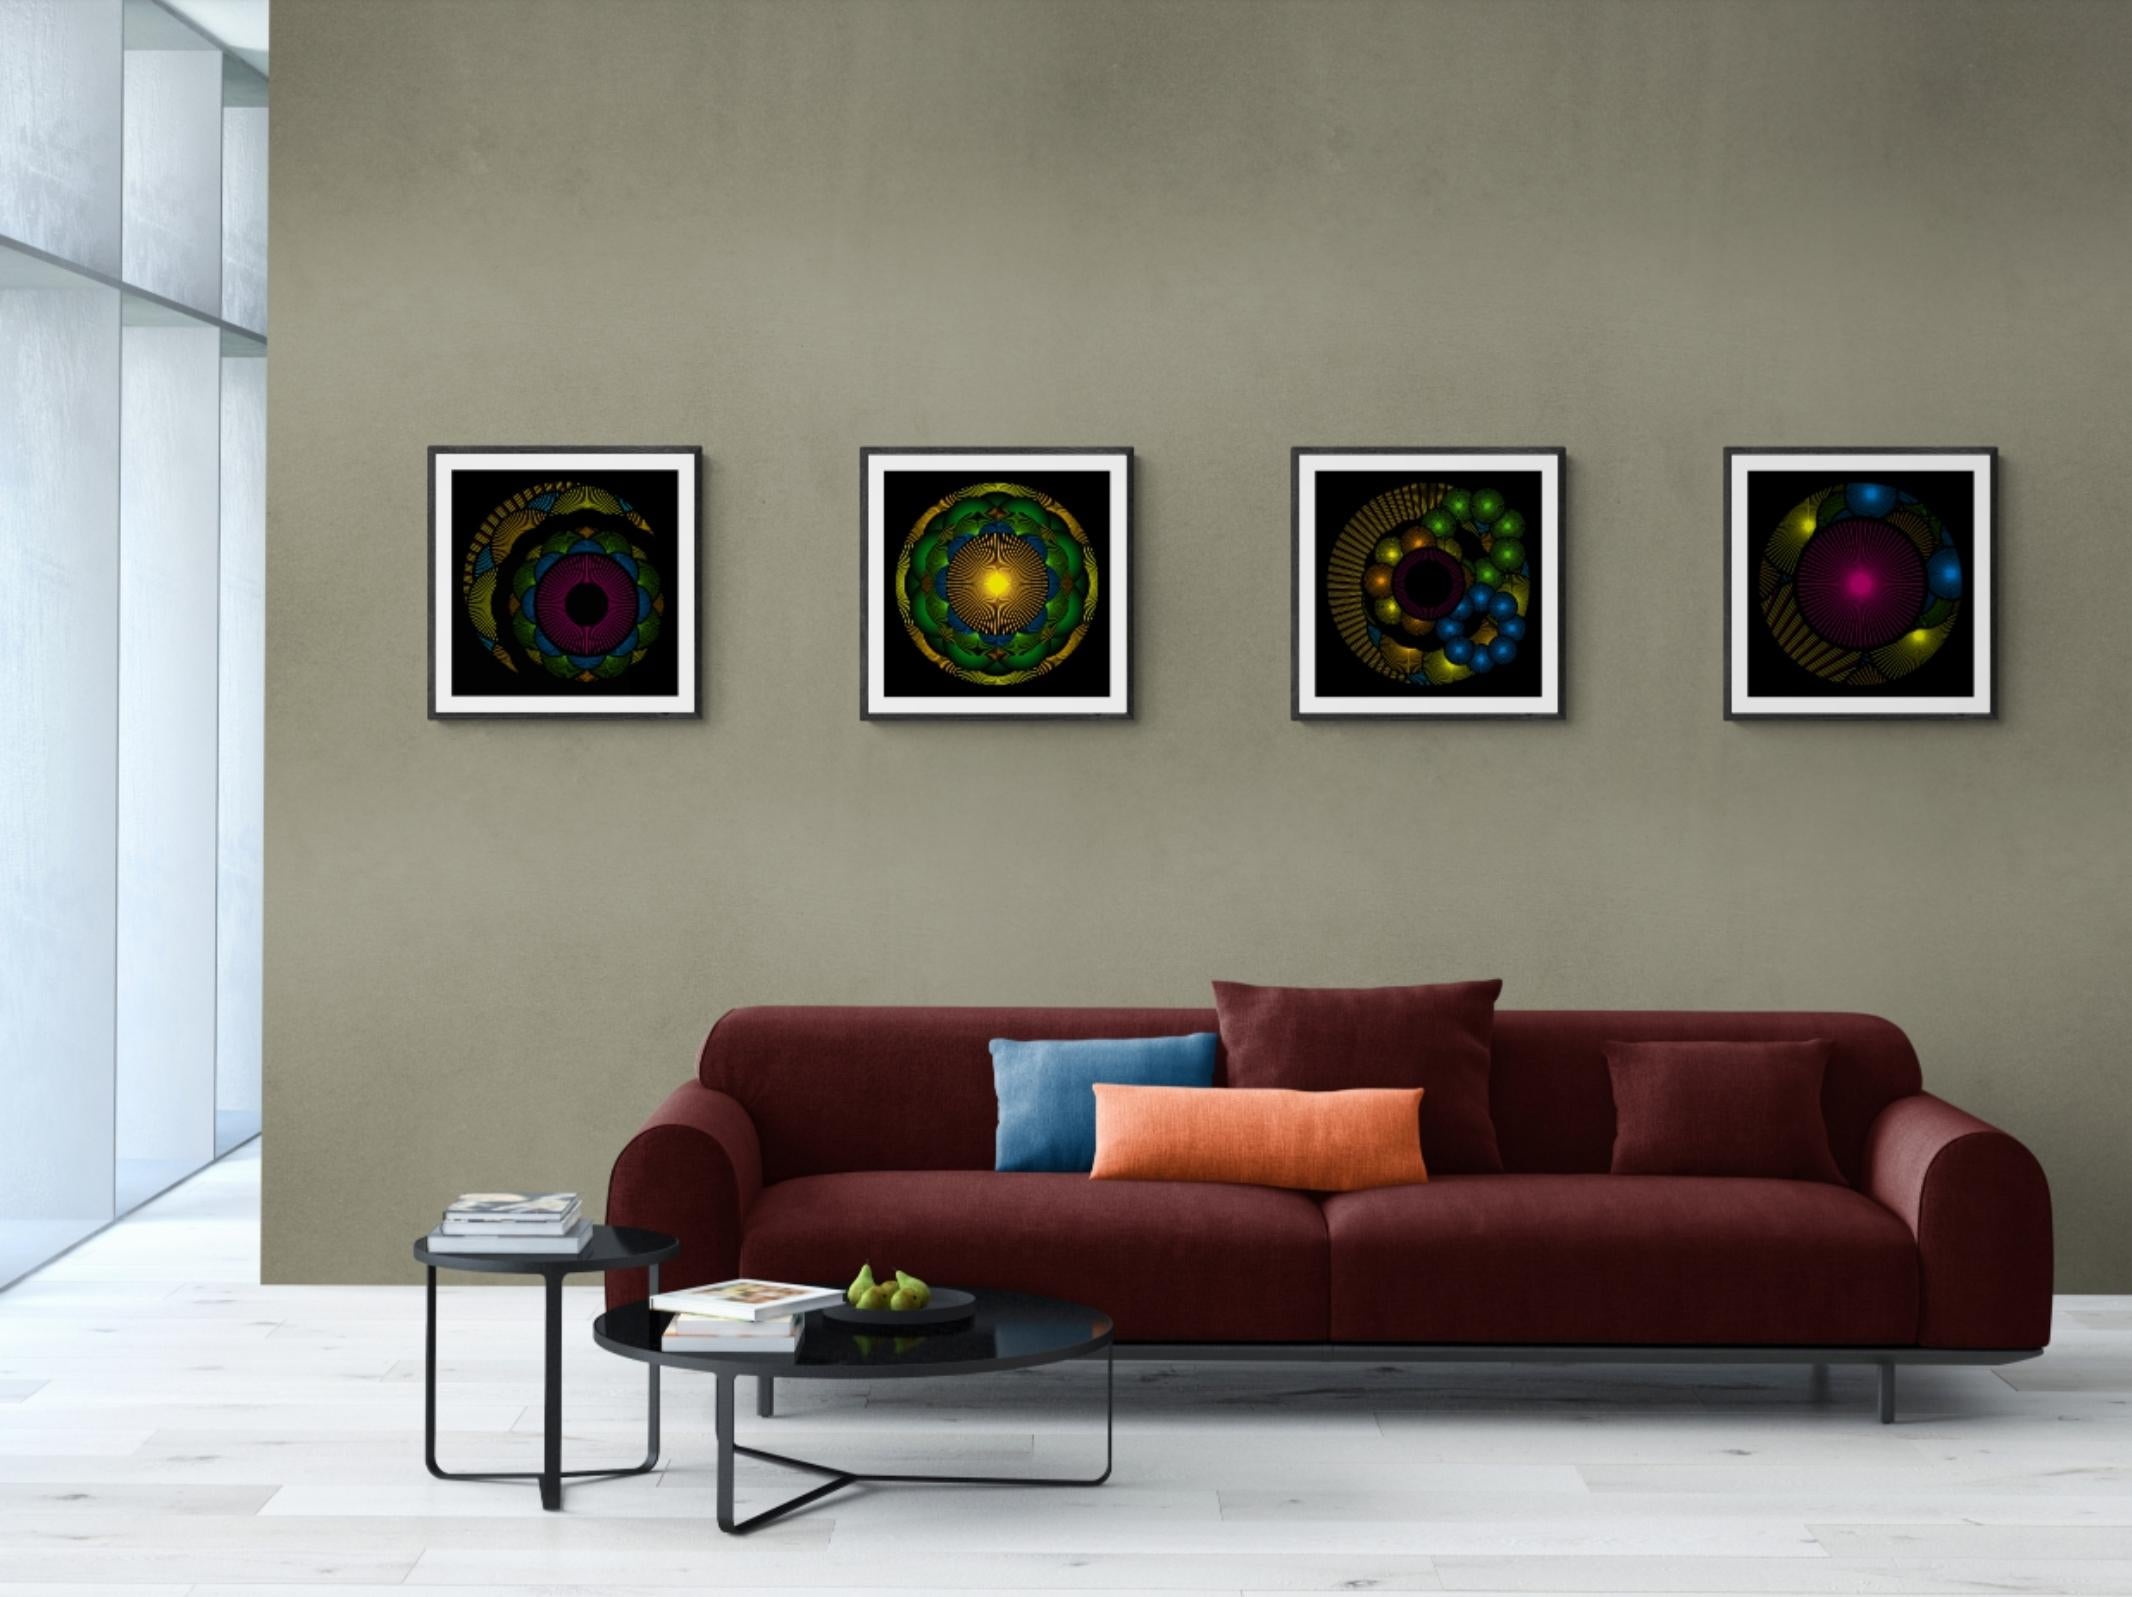 Nebulosa 12 - Black Abstract Print by Julio Campos